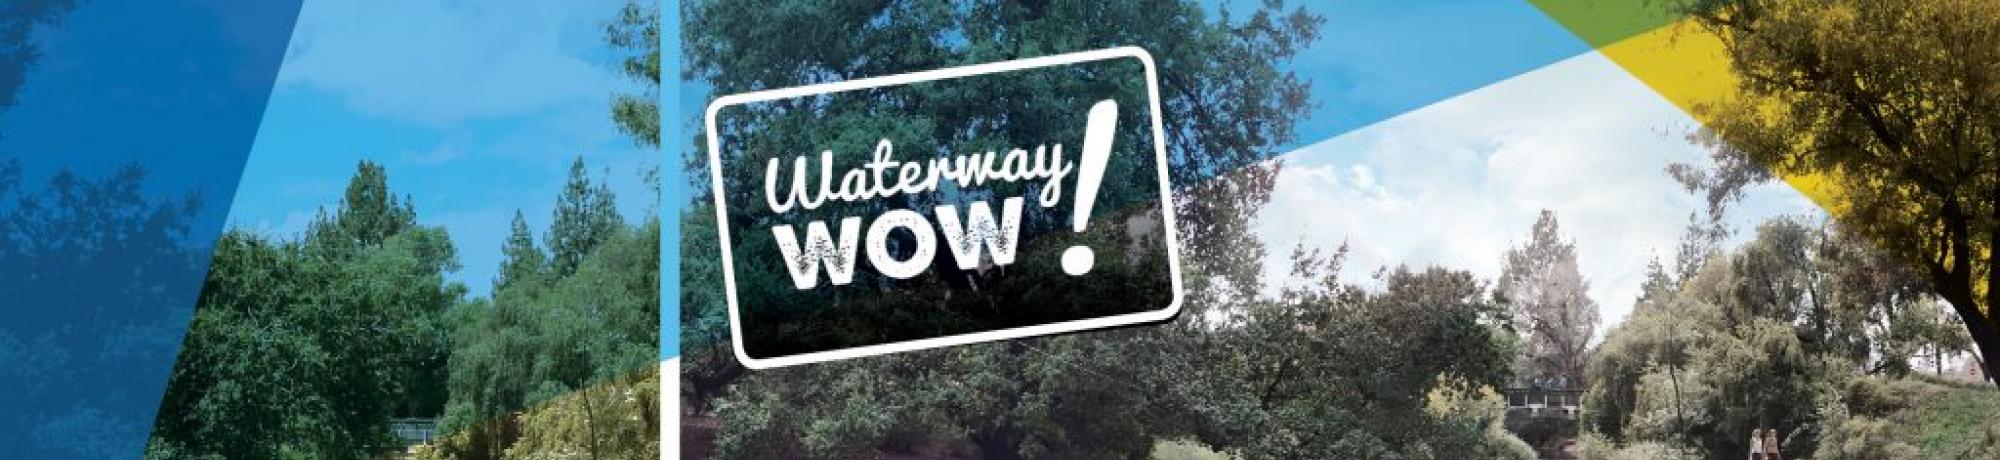 Image of a before and after image of the Arboretum Waterway.